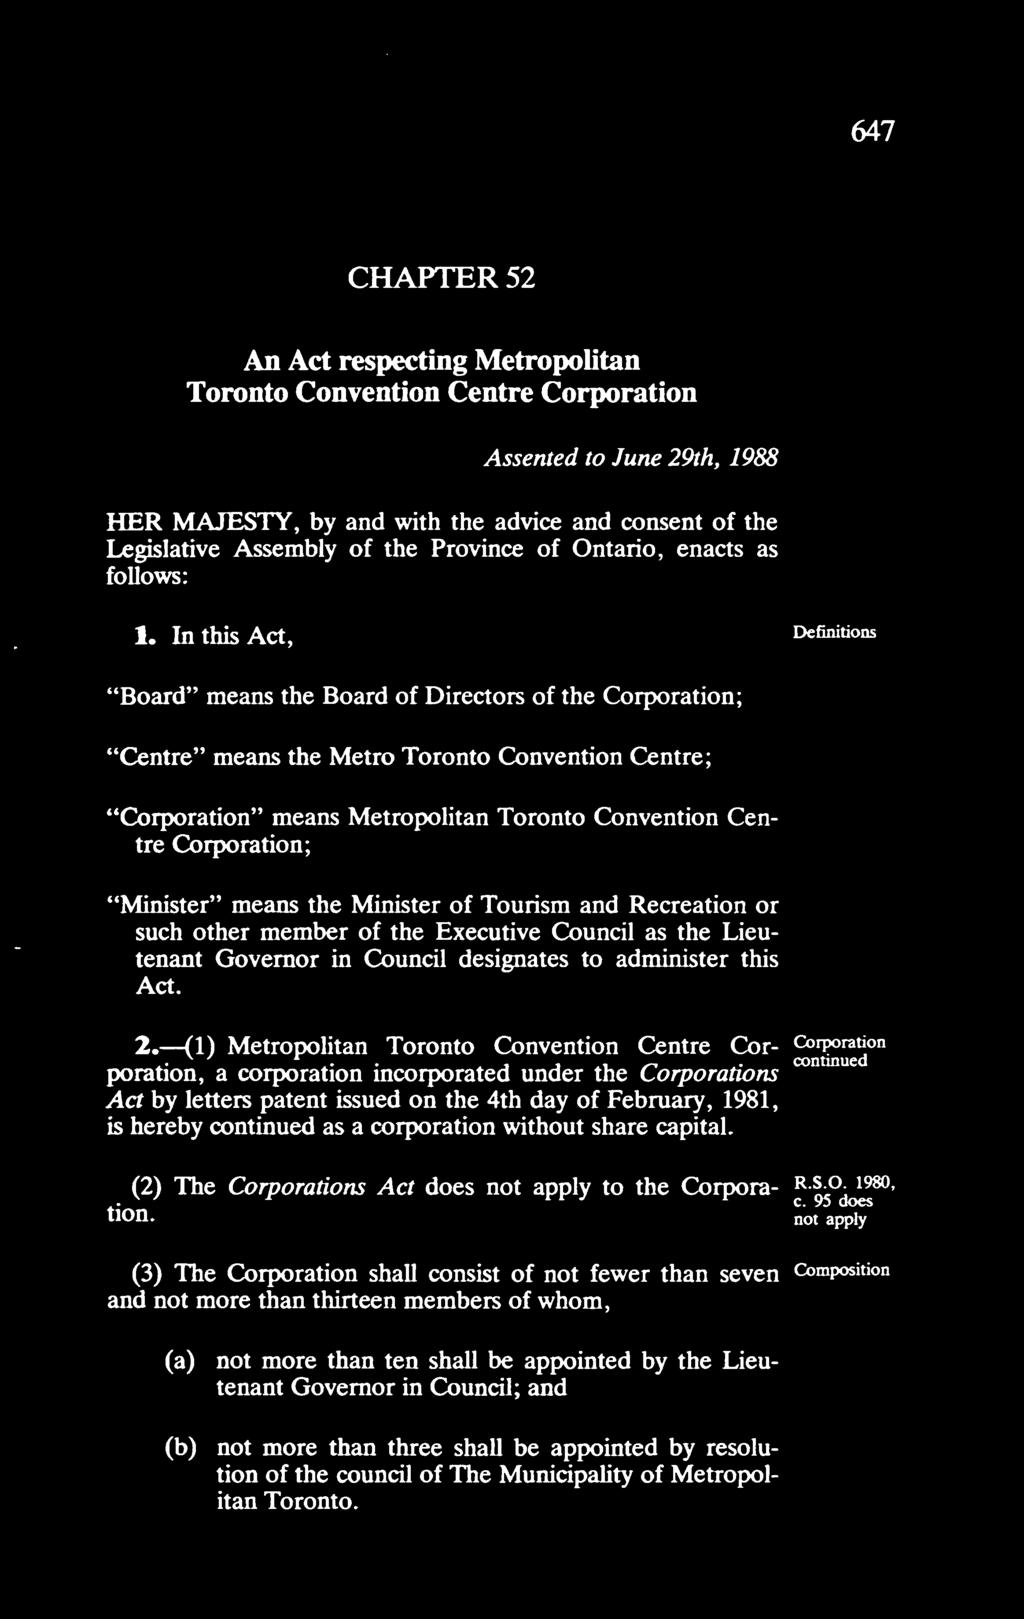 In this Act, Definitions "Board" means the Board of Directors of the Corporation; "Centre" means the Metro Toronto Convention Centre; "Corporation" means Metropolitan Toronto Convention Centre